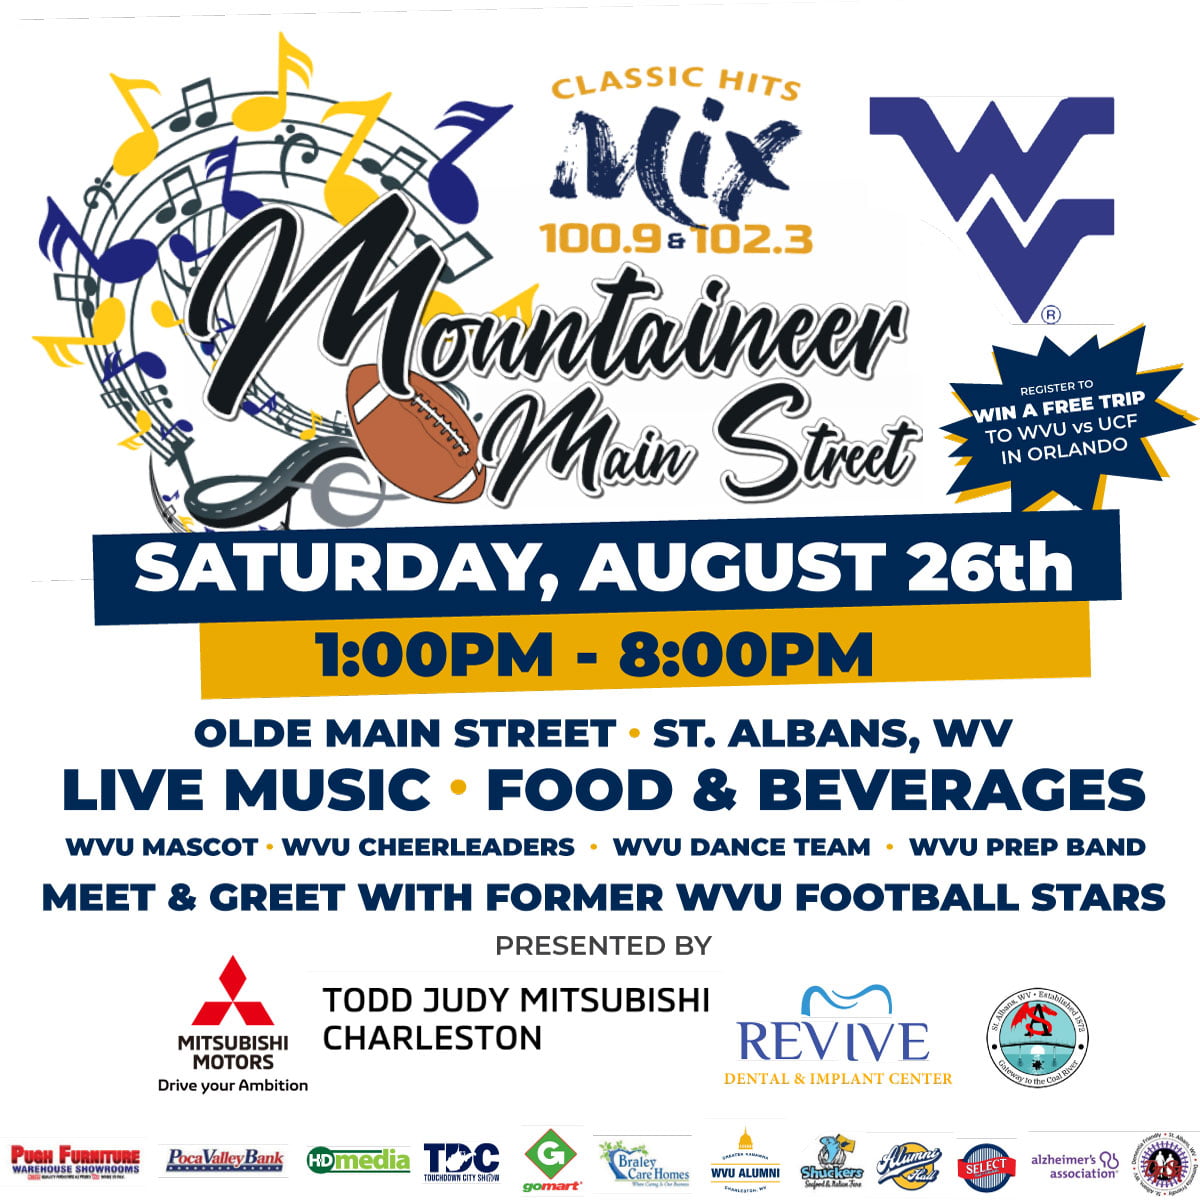 Get ready, Mountaineer fans! We're painting Olde Main Street in St. Albans, WV, blue and gold for the Mountaineer Main Street block party on August 26, 2023, from 1:00PM to 8:00PM. This is the ultimate celebration of Mountaineer spirit, and it's FREE for everyone!